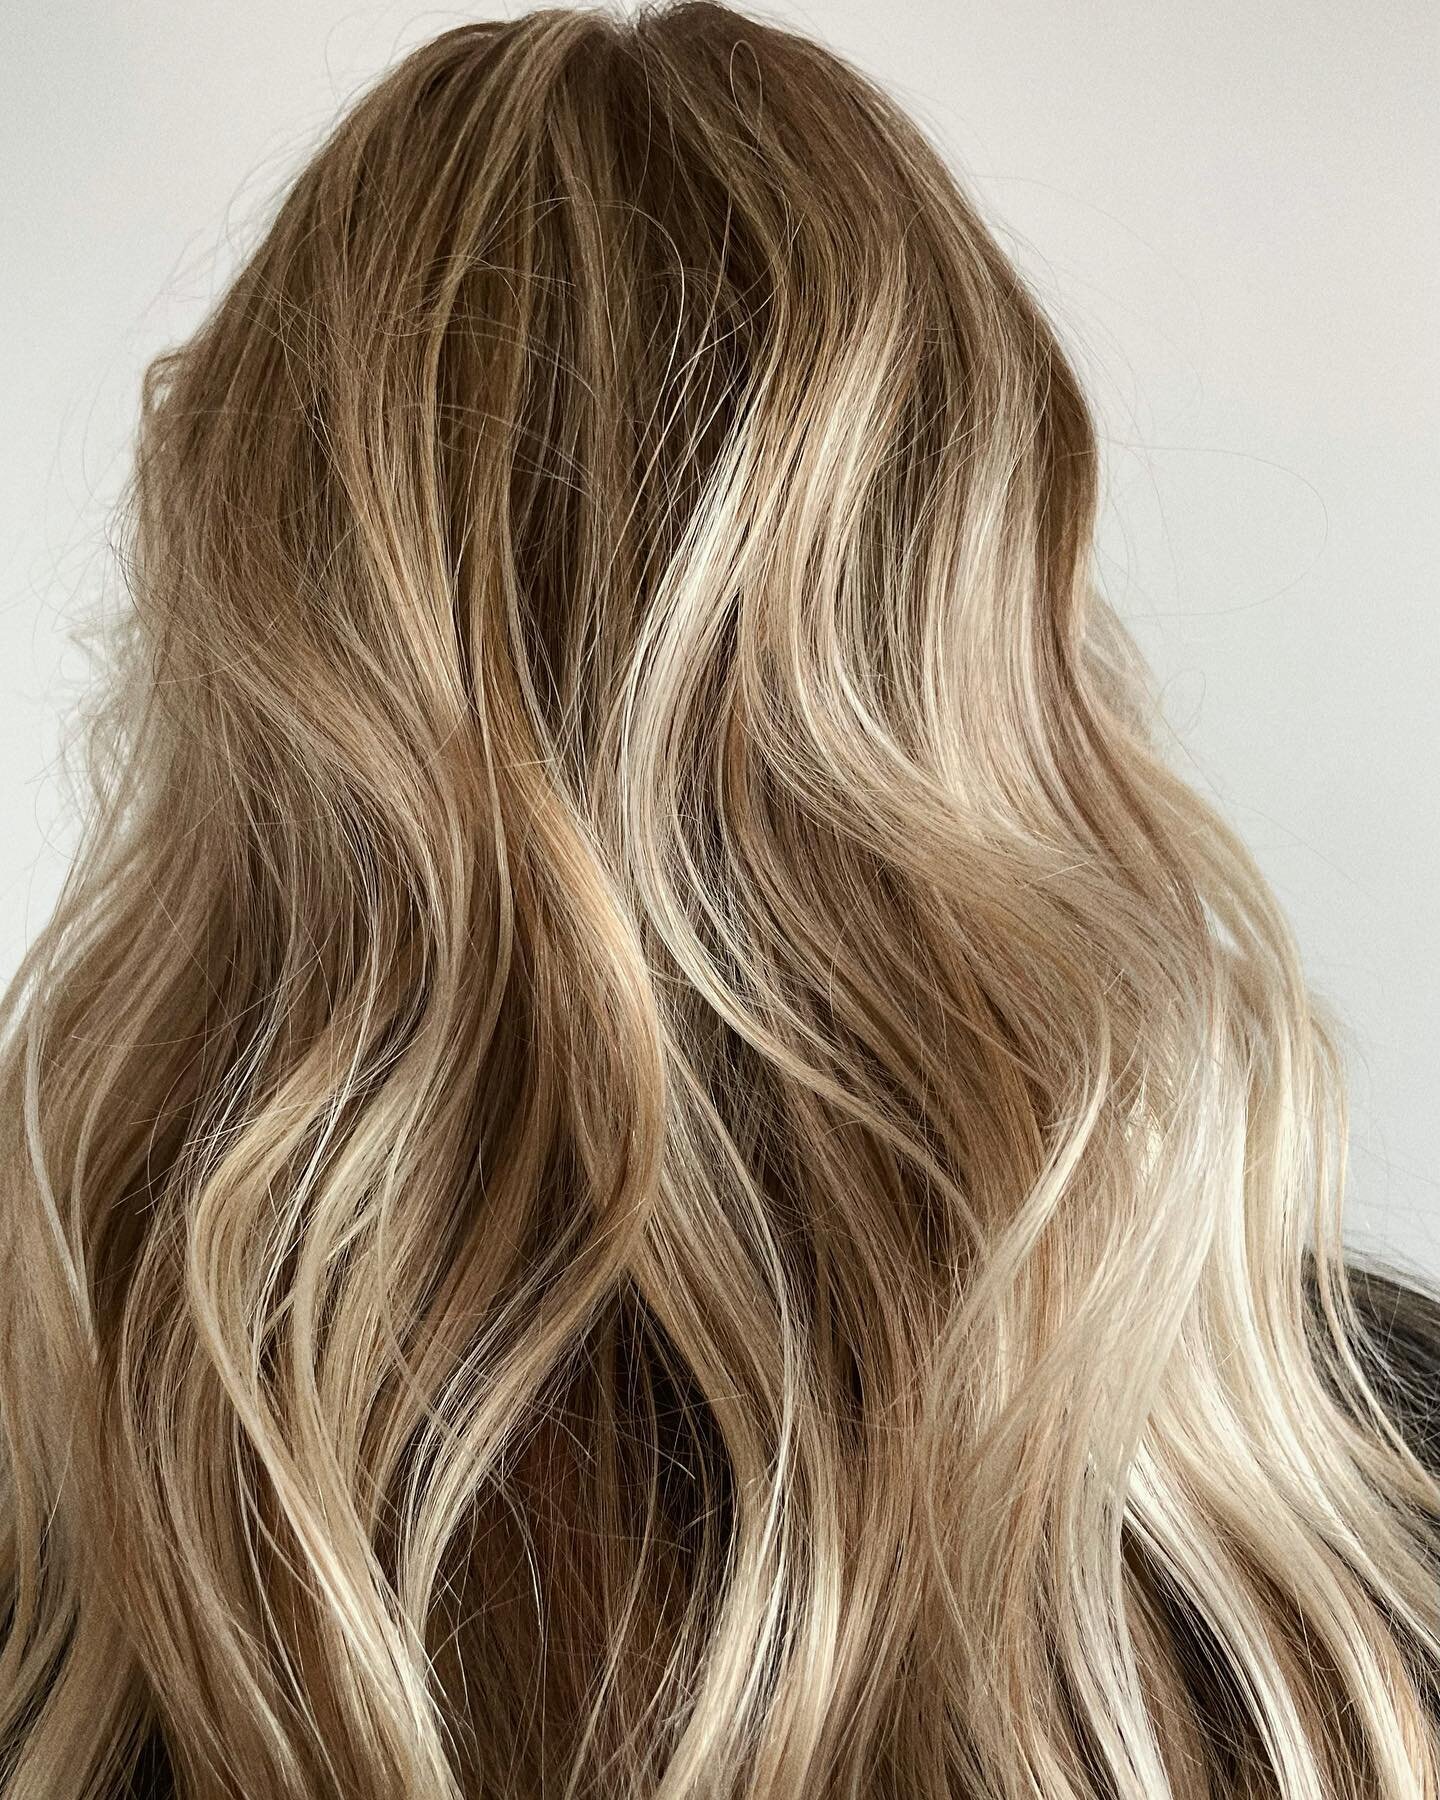 BLONDE 
pops of brightness are essential to making your blonde standout. 

While your root toner sits, I like to wet balayage the hair if it needs an extra kick. This means adding lightener in a strategic way to add brightness in those areas that nee